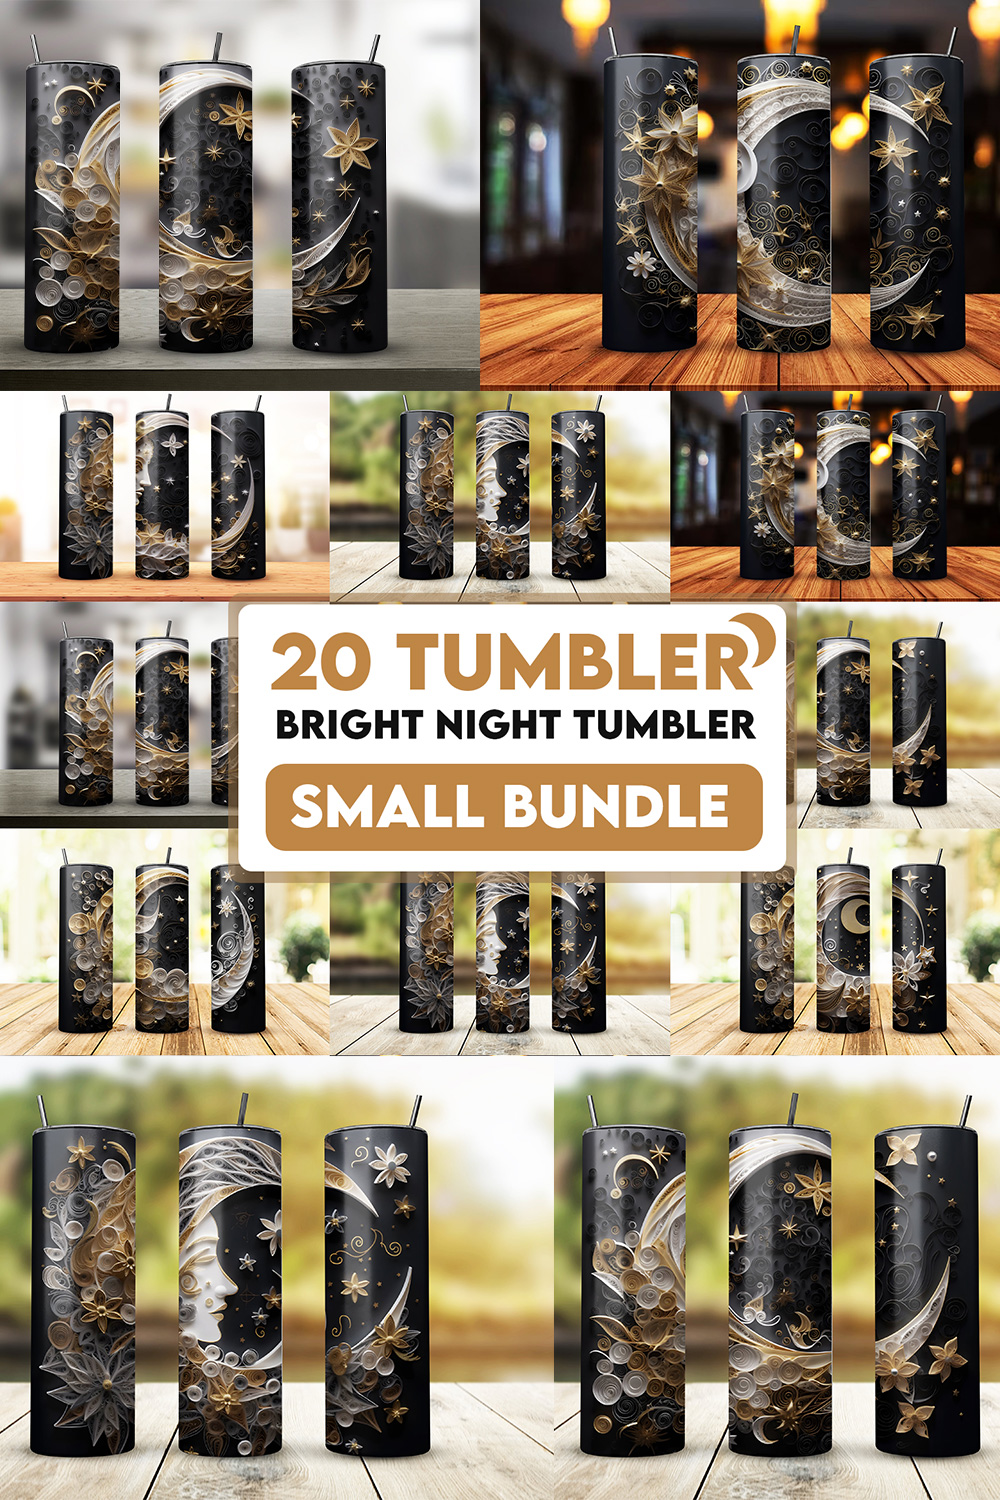 Bright Night Tumbler pinterest preview image.